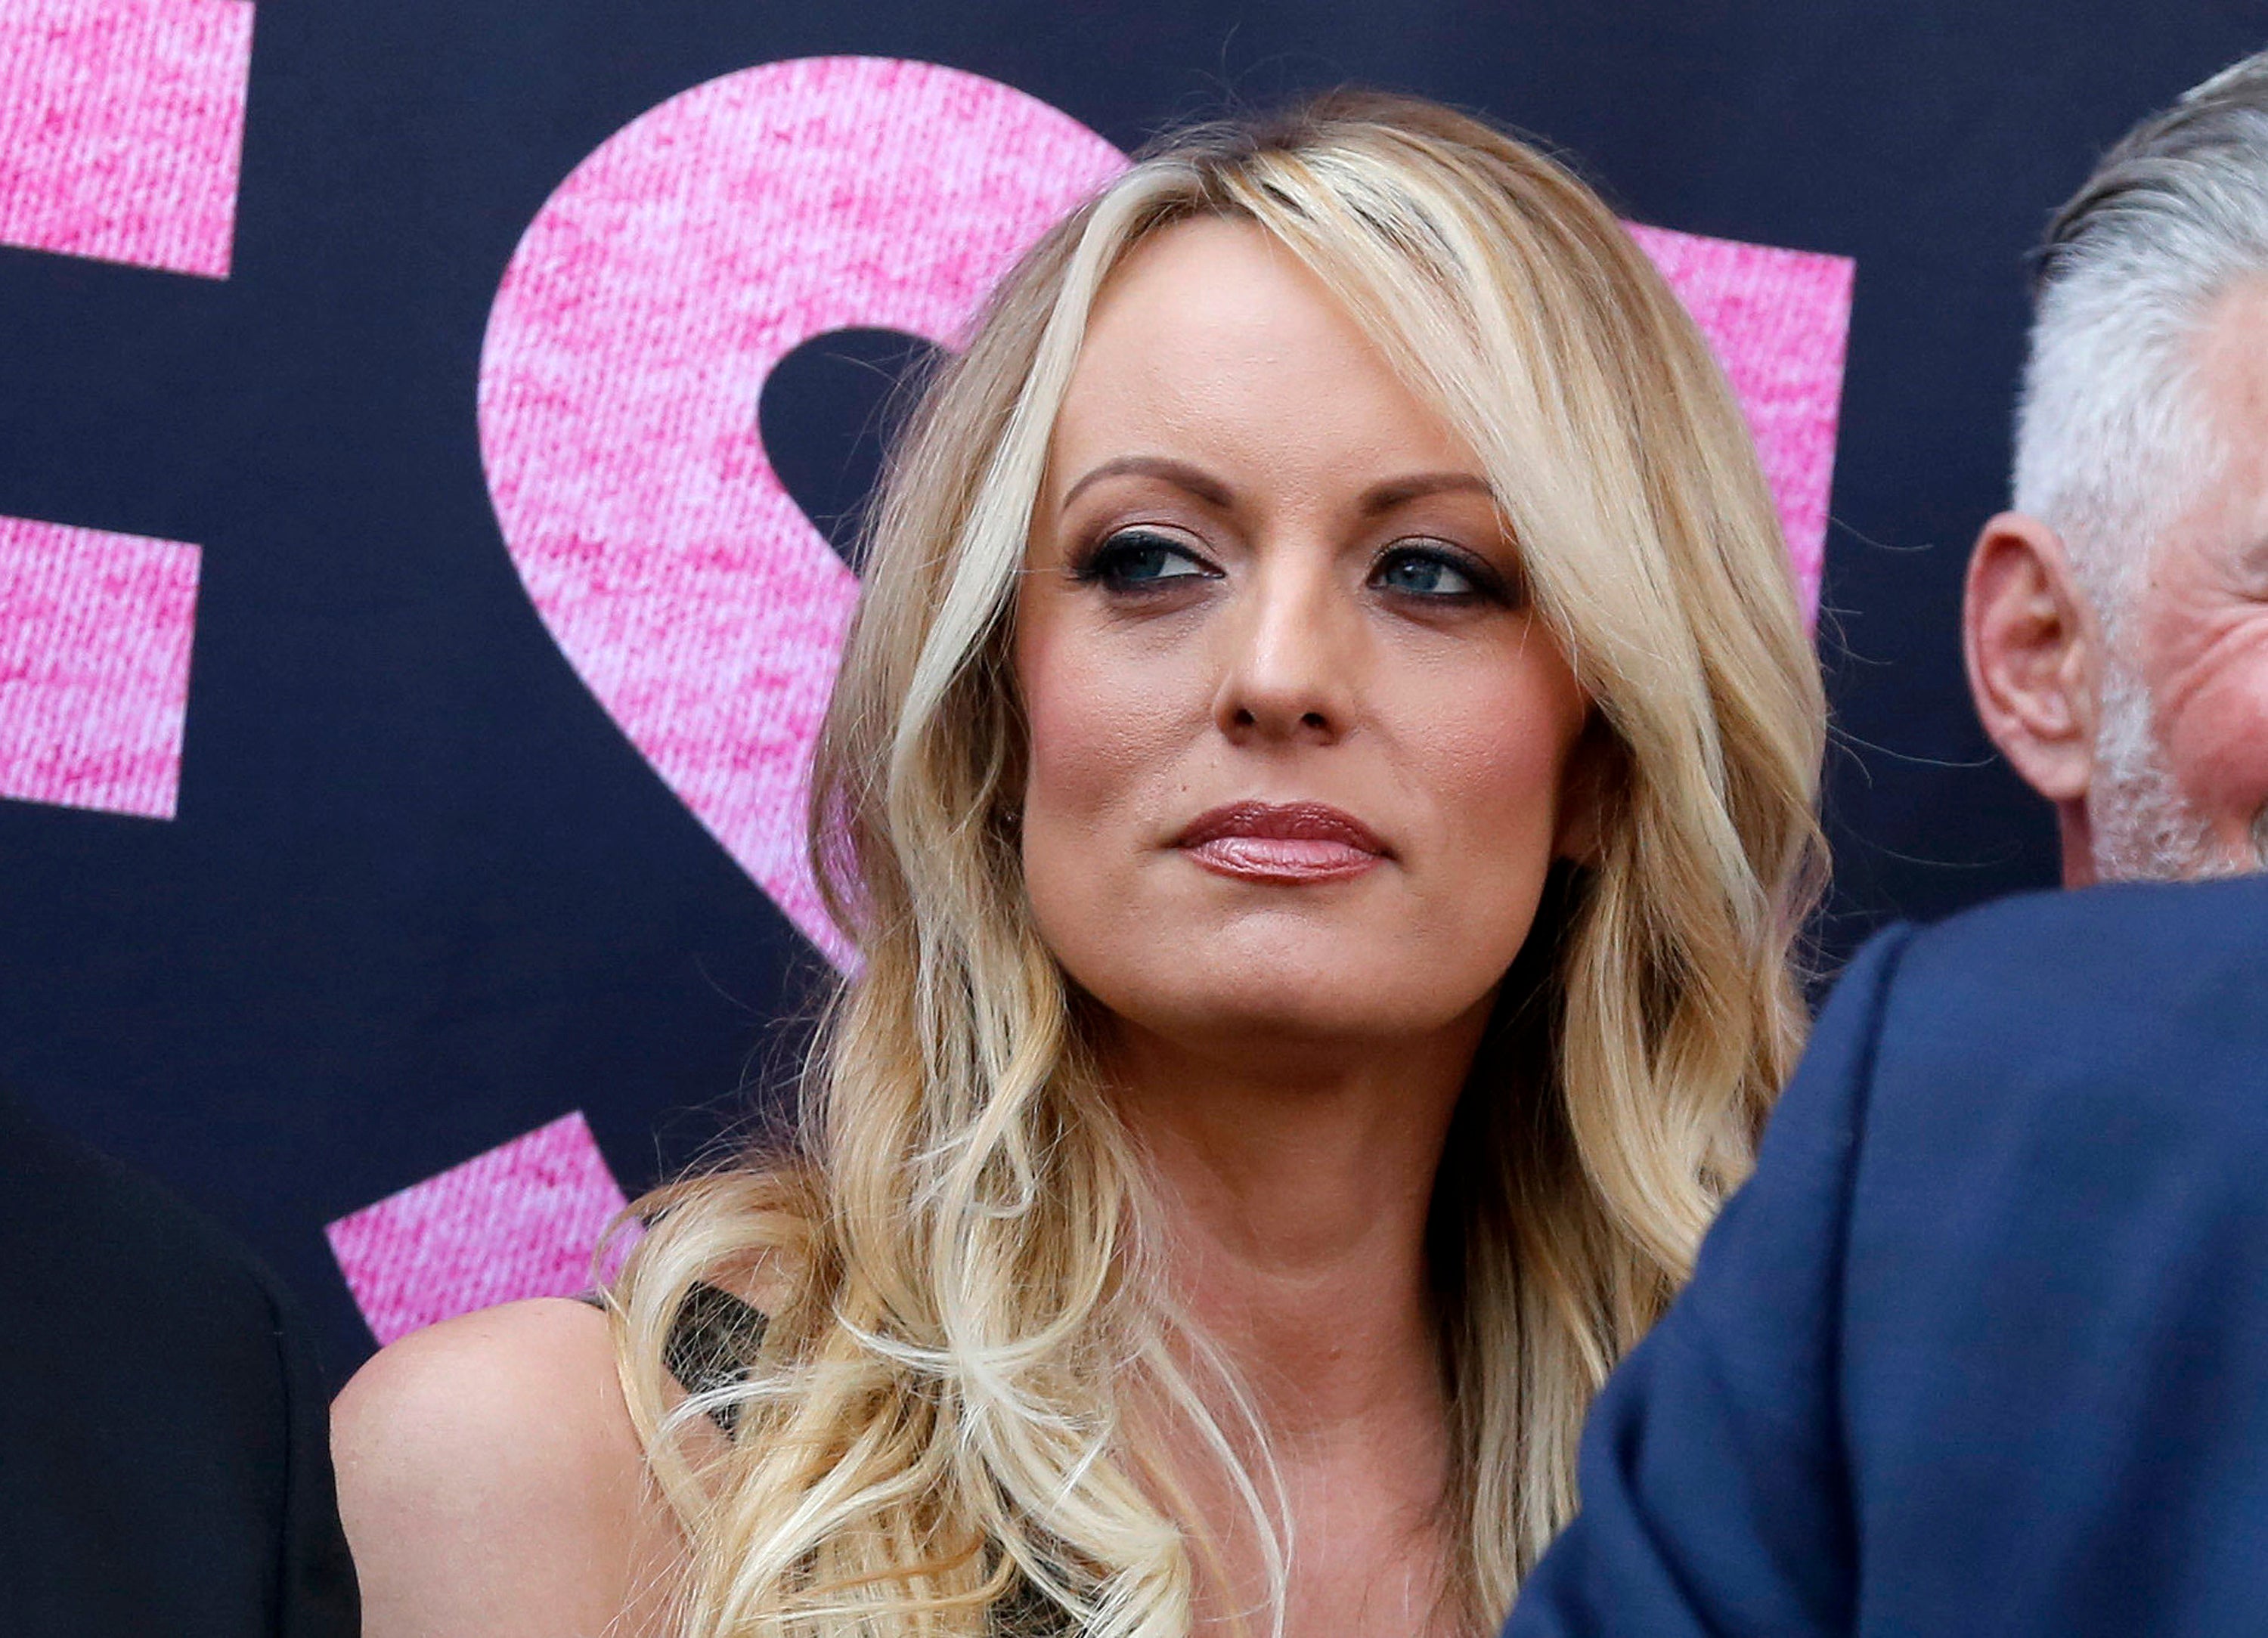 Stormy Daniels appears at an event in May 2018 in West Hollywood, California